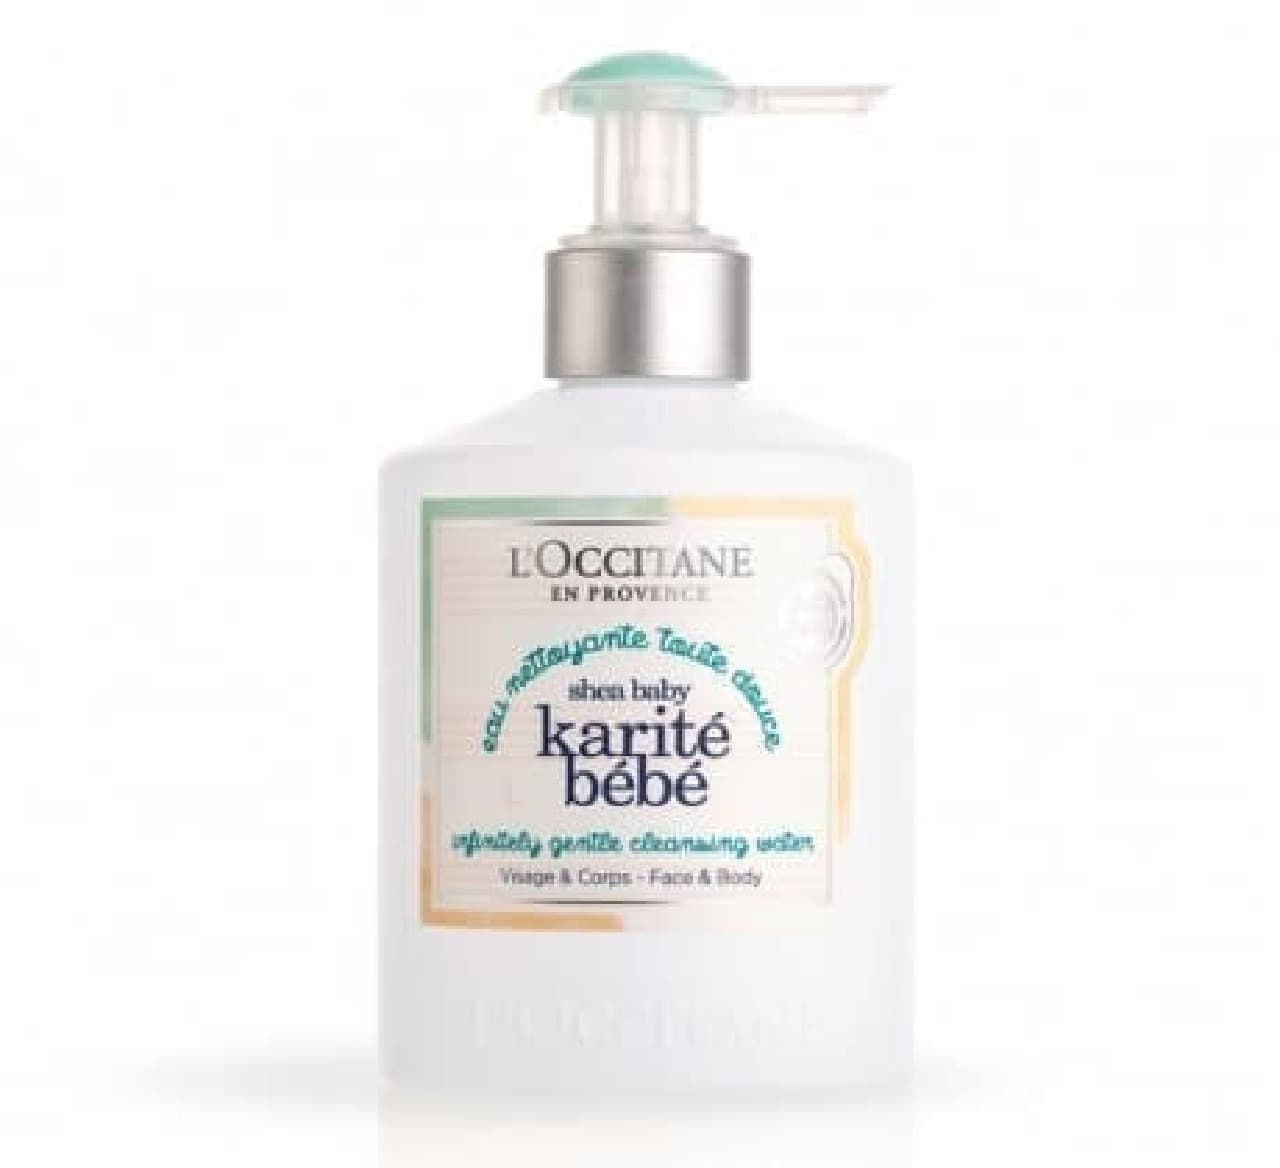 L'Occitane "Sheer Baby Gentle Cleansing Water"